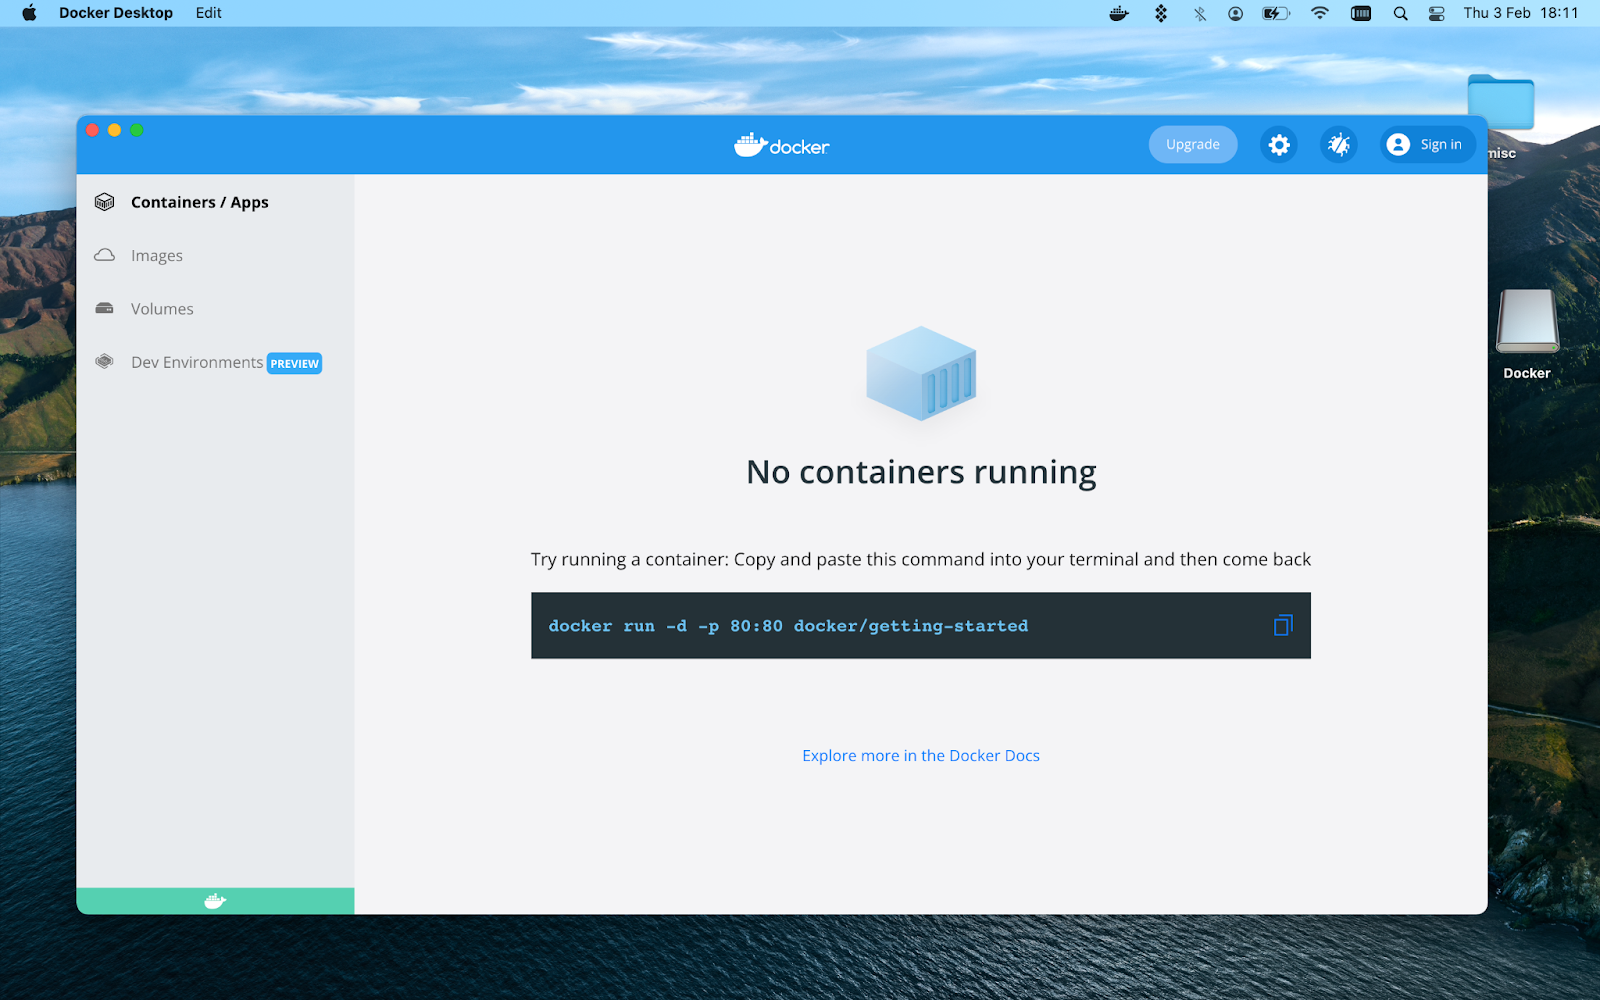 Try running a container